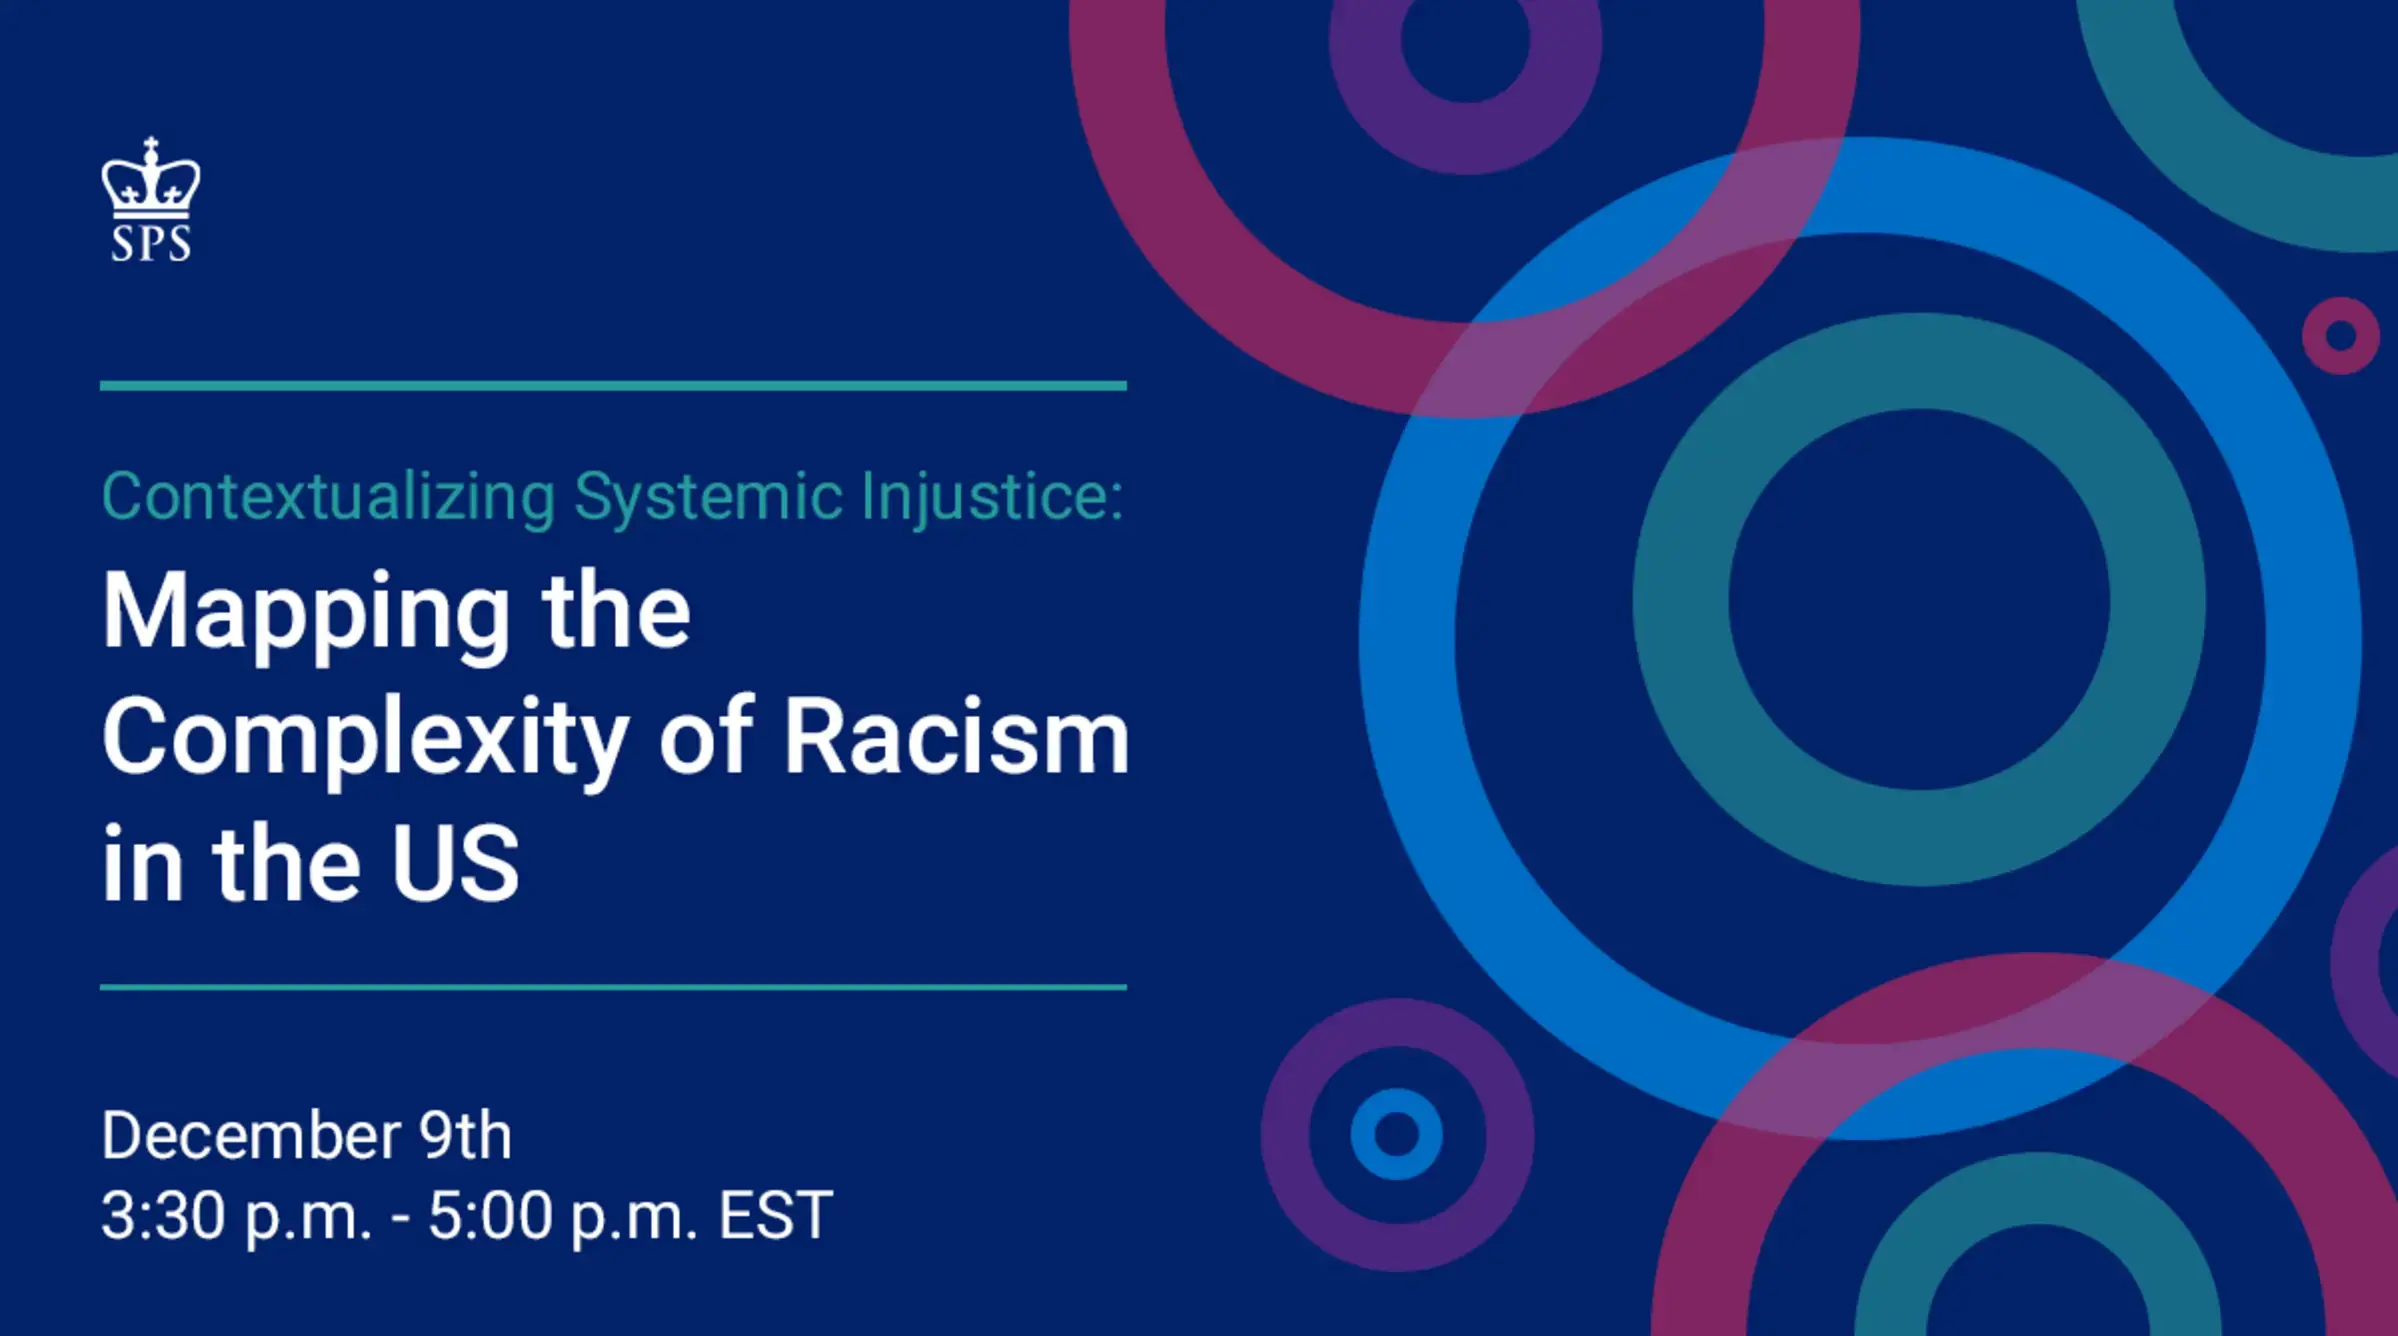 Contextualizing Systemic Injustice: Mapping the Complexity of Racism in the US